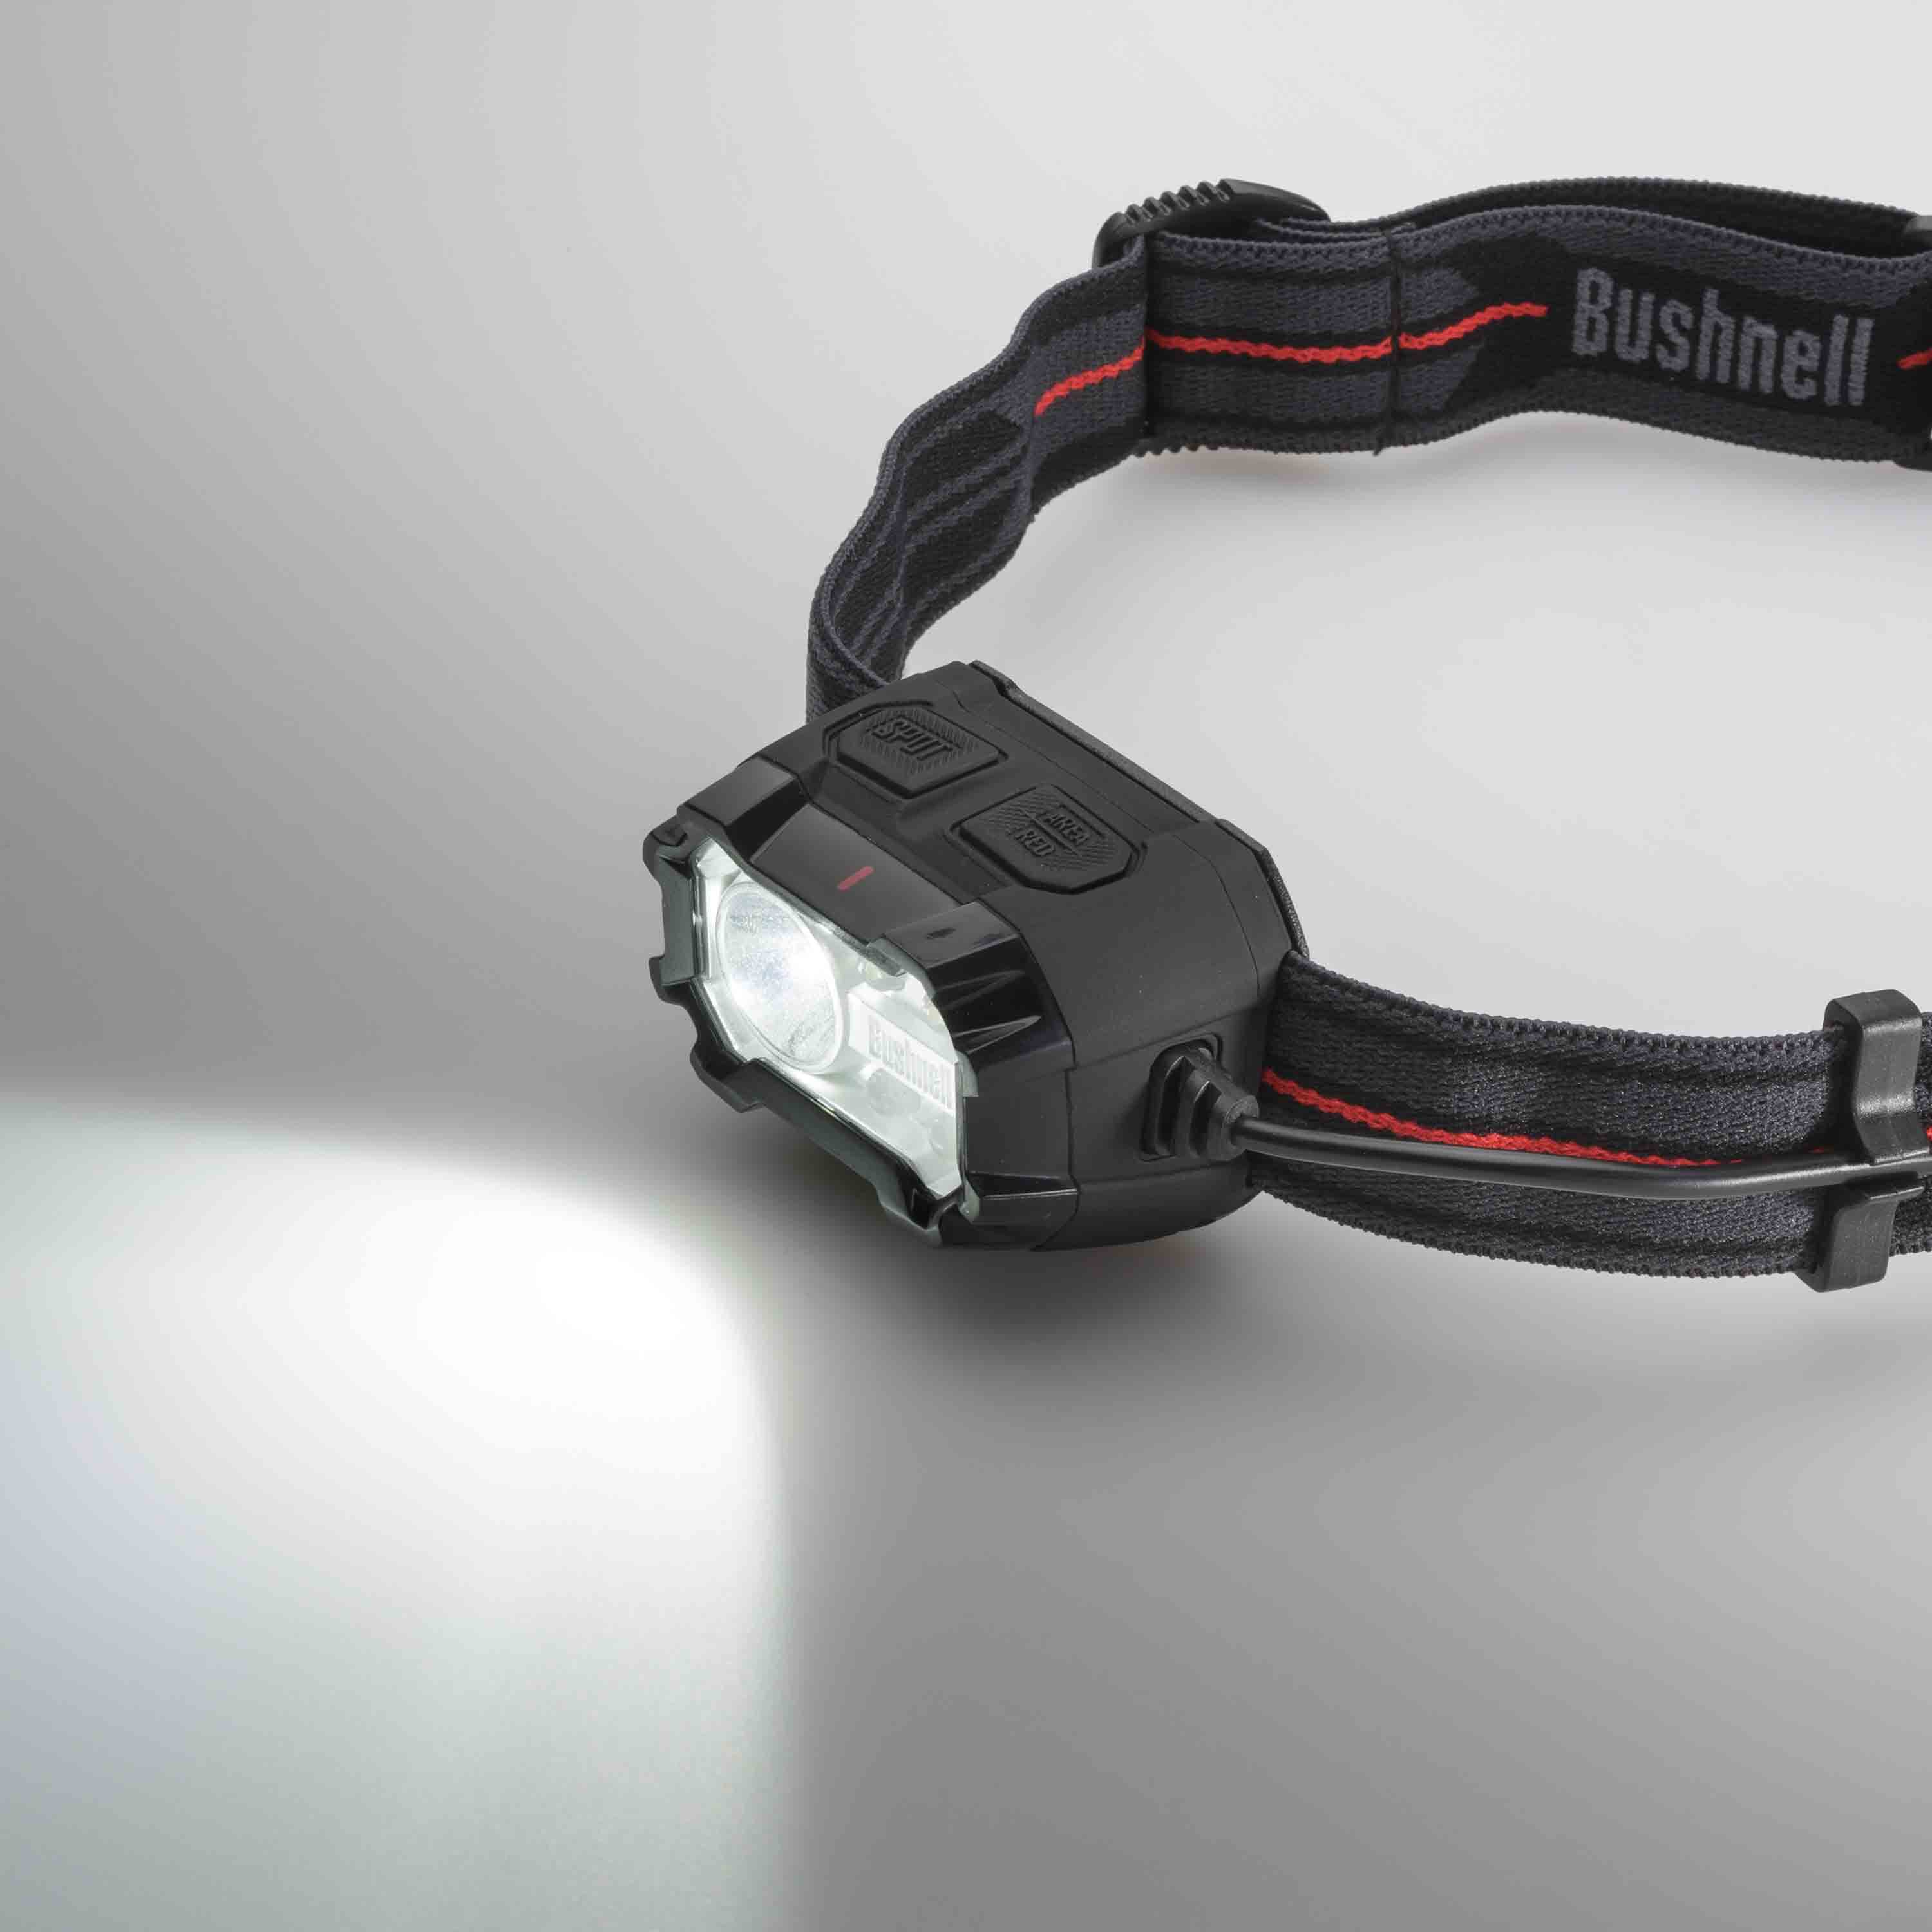 2 Pack Bushnell Rechargeable Li Ion Headlamps 300 Lumen IPX4 NEW 